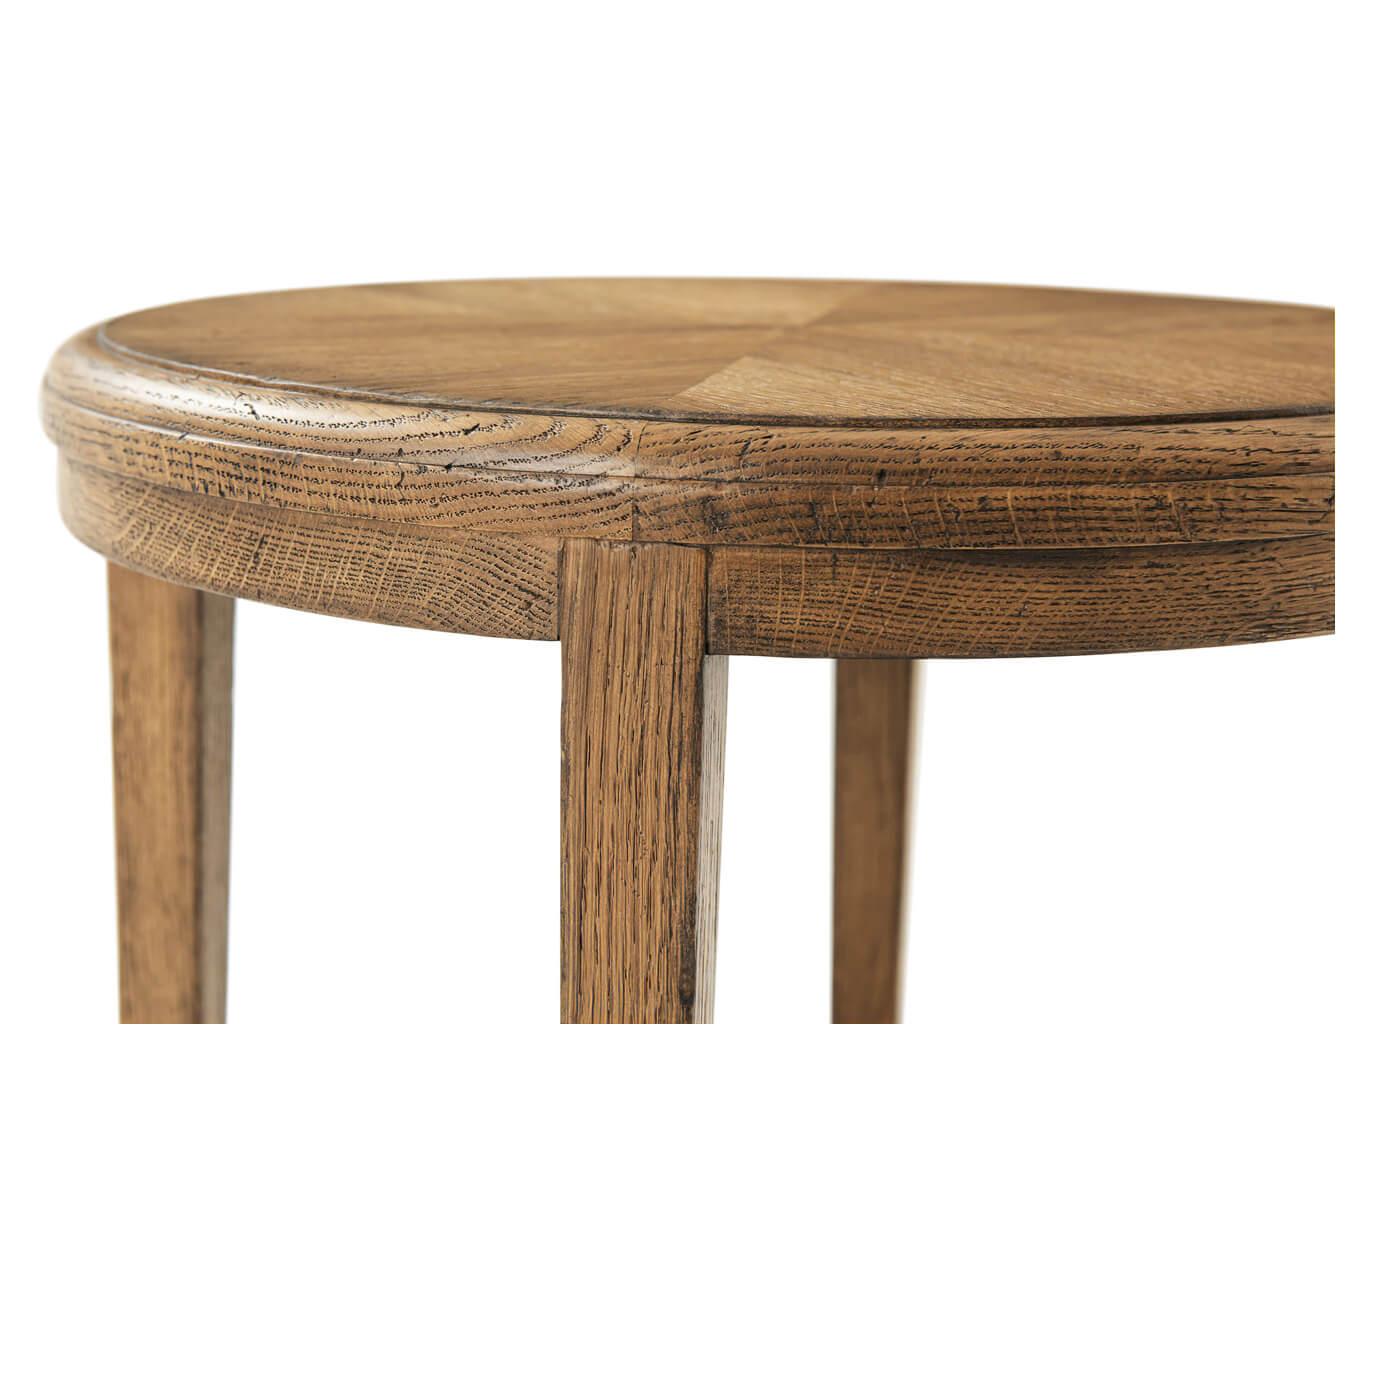 Oak Parquetry Round Side Table, Light Oak In New Condition For Sale In Westwood, NJ